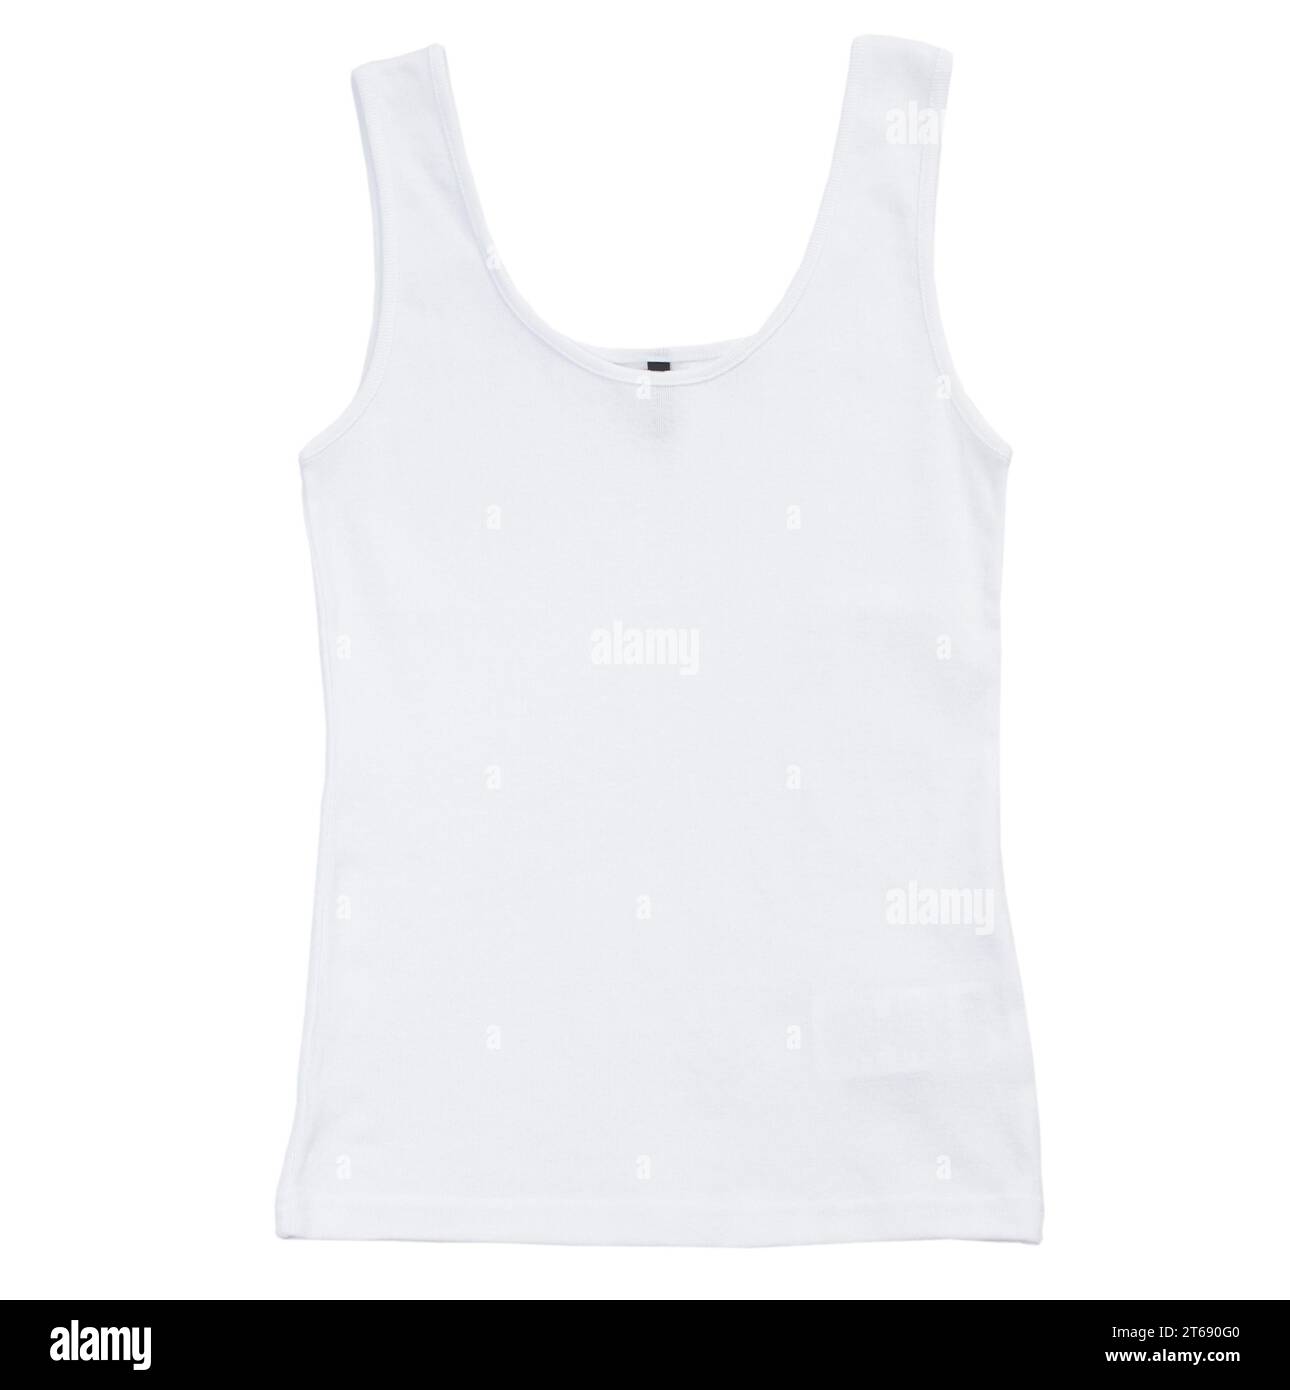 White tank top Free Stock Photos, Images, and Pictures of White tank top